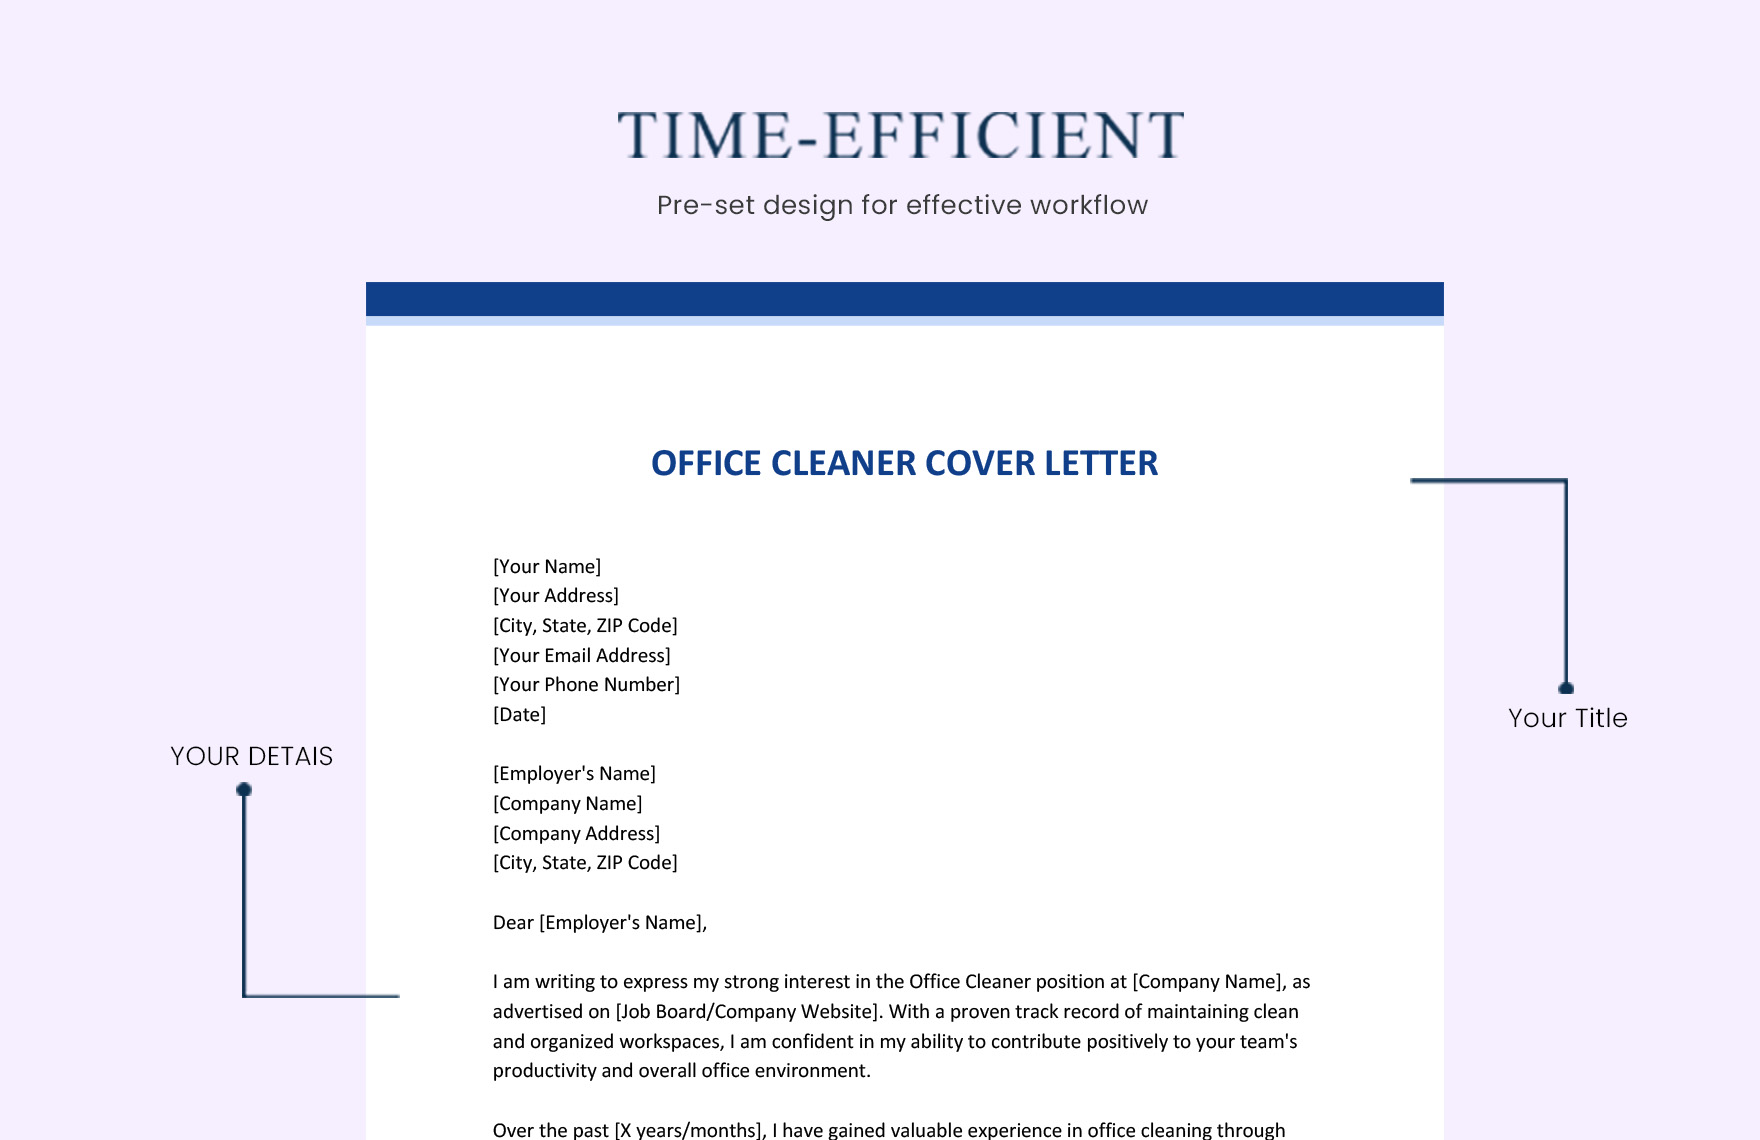 Office Cleaner Cover Letter